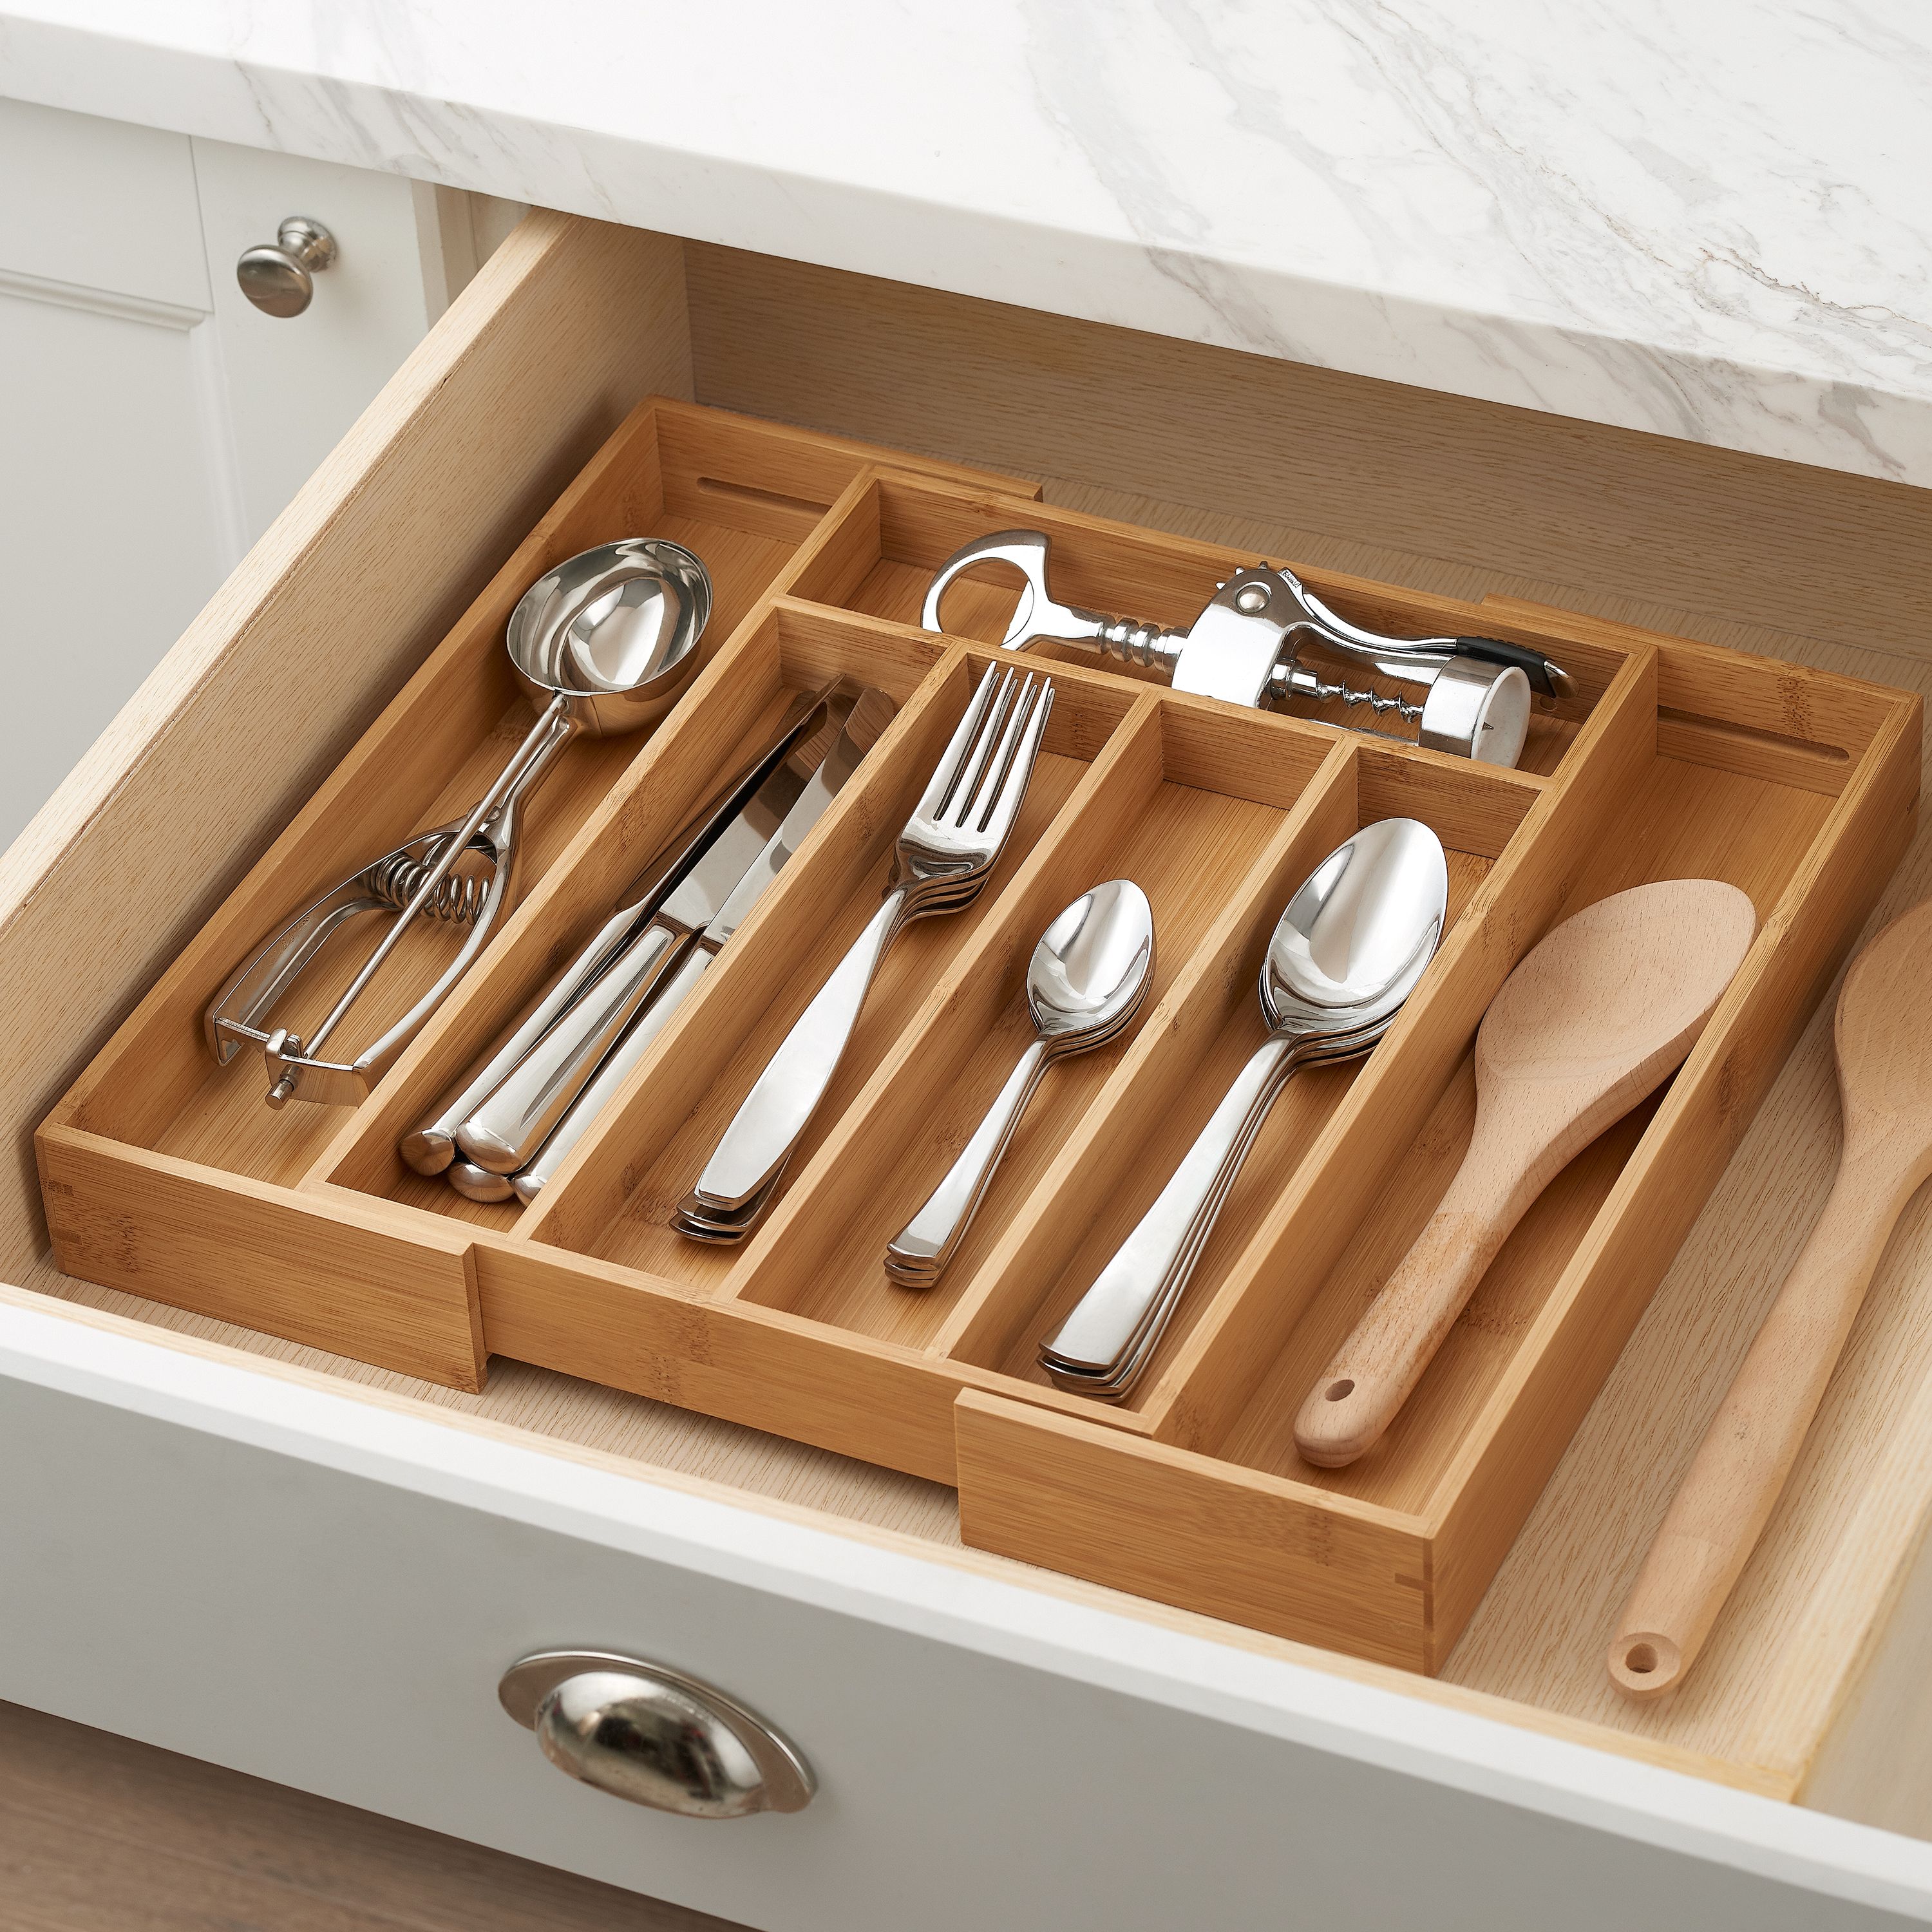 Better Homes & Gardens Expandable Bamboo Utensil and Silverware Organizer - image 4 of 5